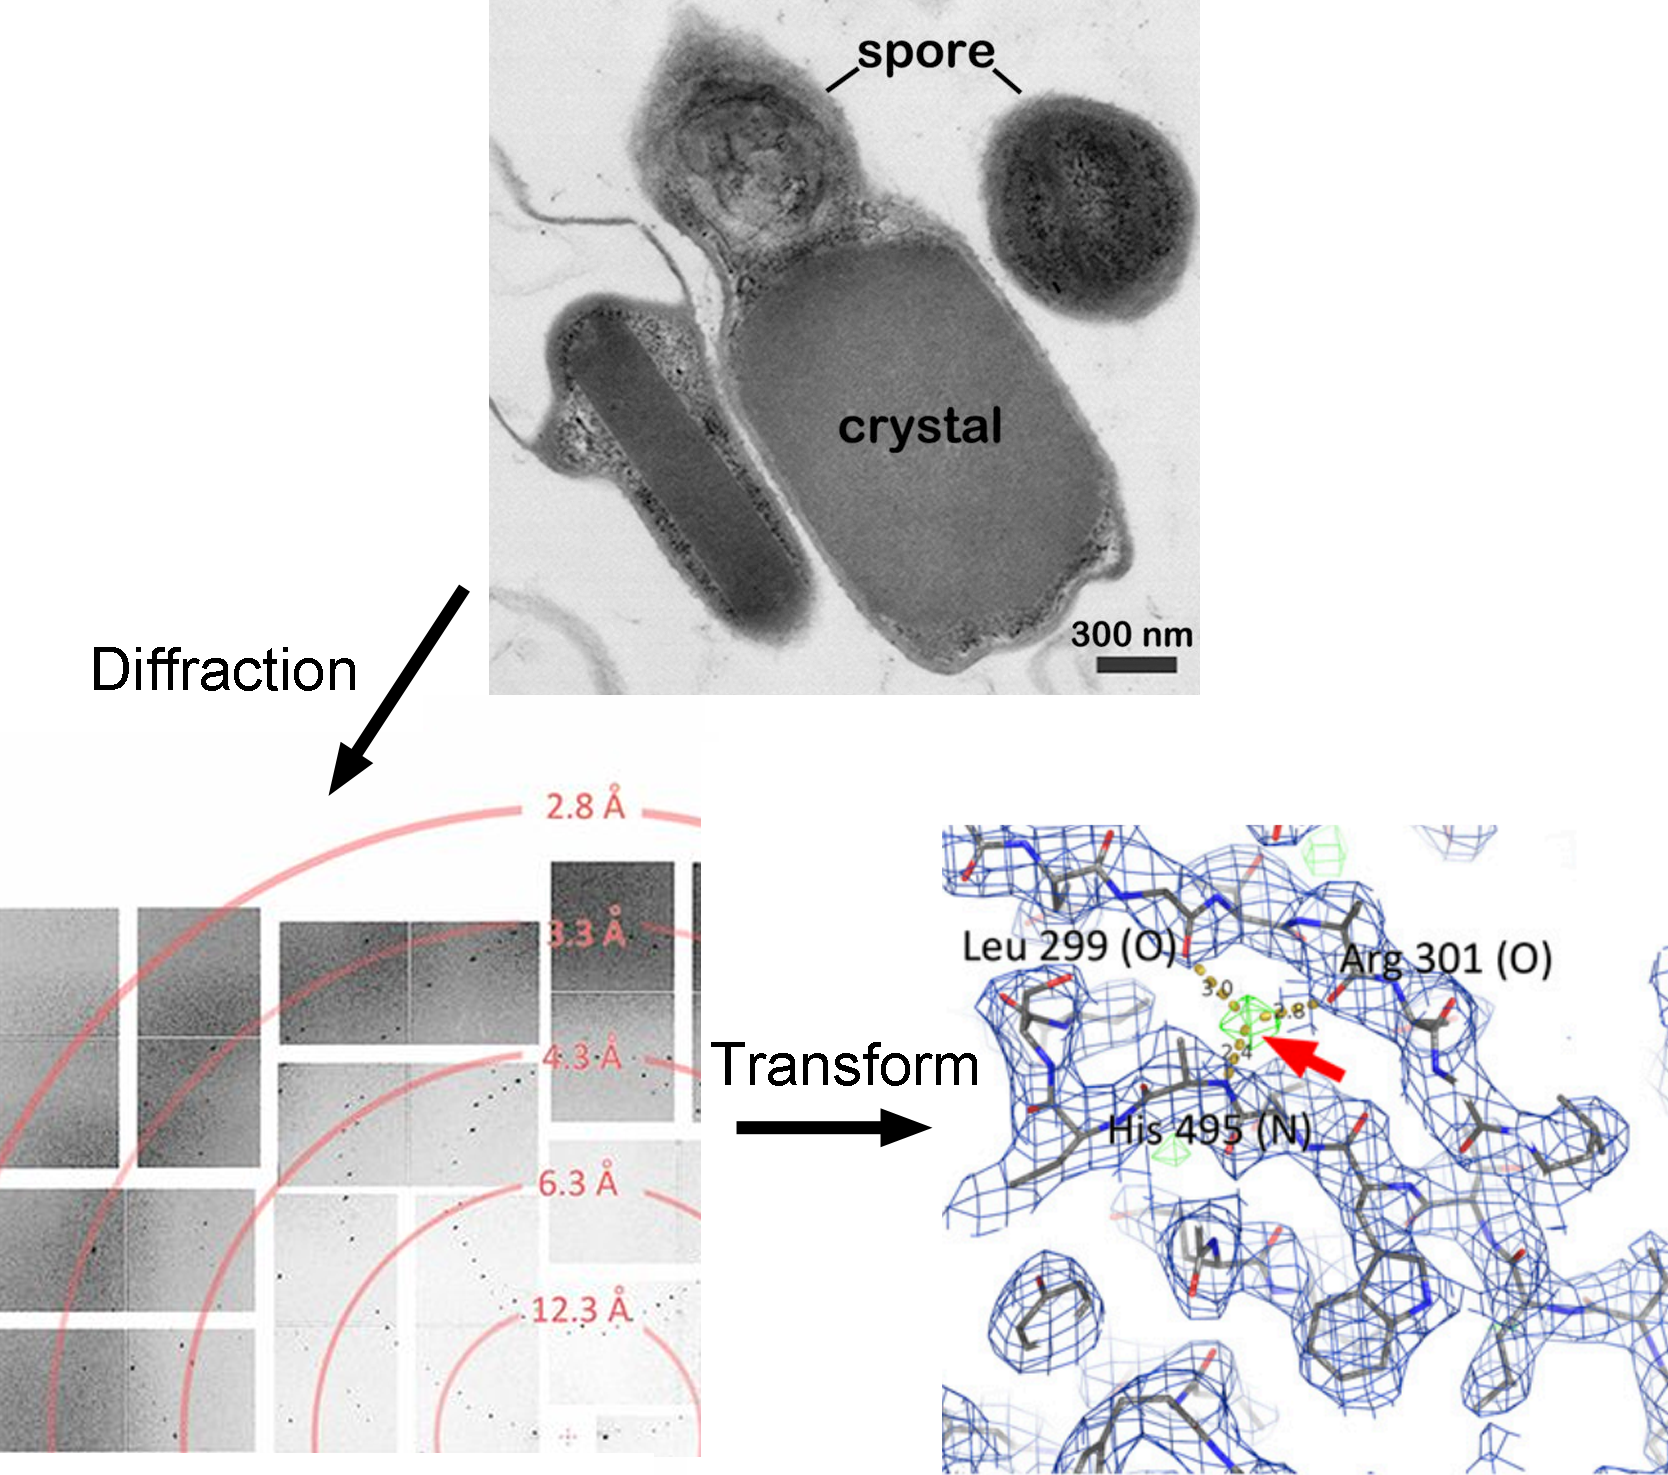 Top panel is an electron micrograph of Bacillus thuringiensis used in this study. The crystal occupies most of the cell volume. Diffraction from the cells (lowerleft) extends to 2.9 Å resolution. Lower right shows structural detail.